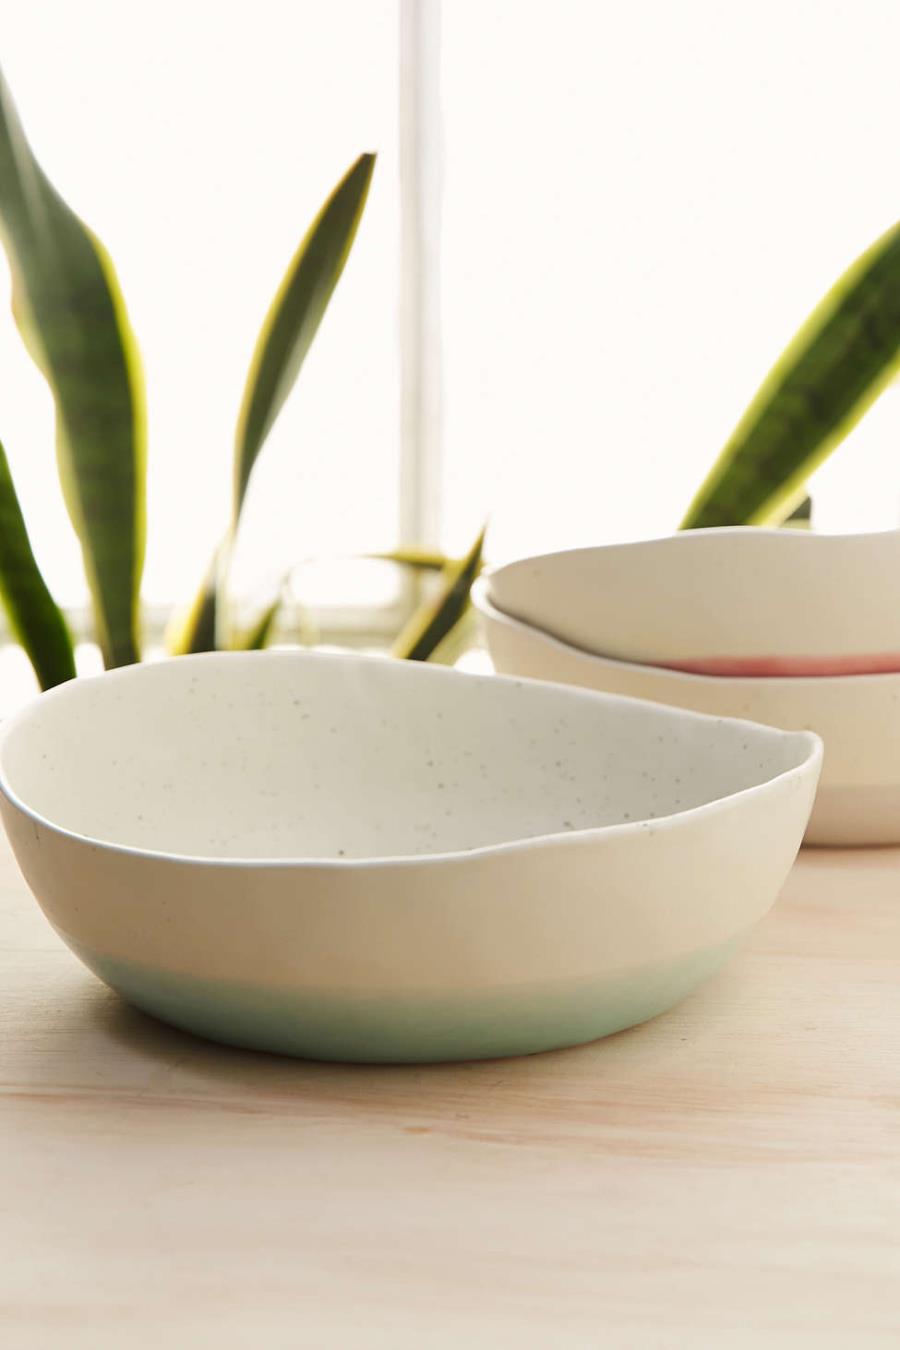 Speckled bowls from Urban Outfitters